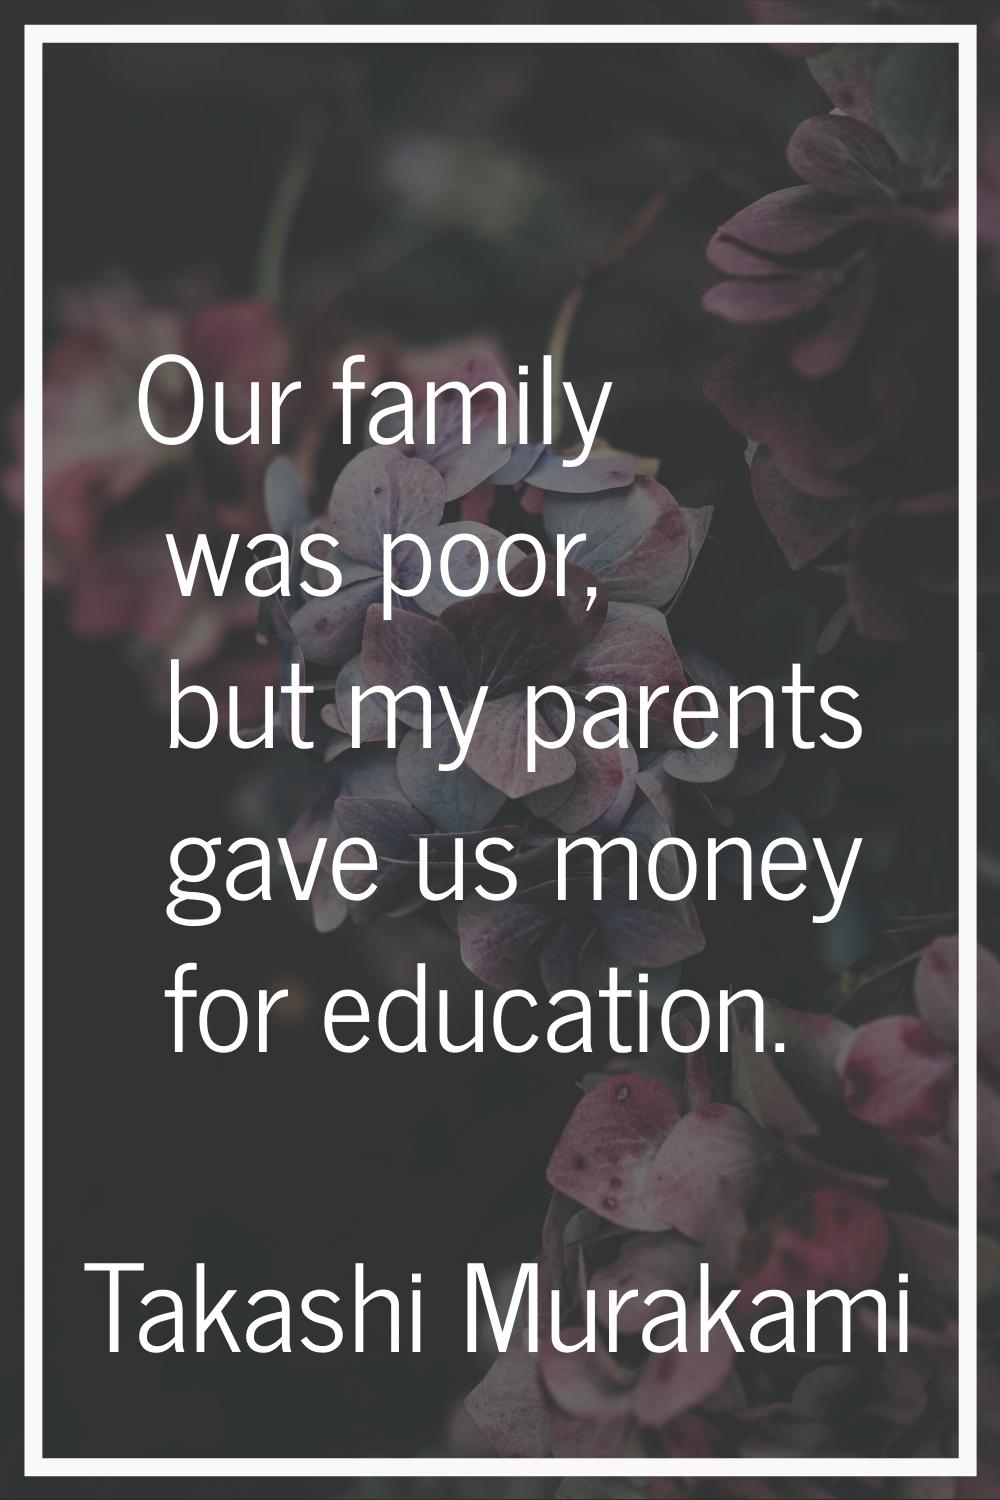 Our family was poor, but my parents gave us money for education.